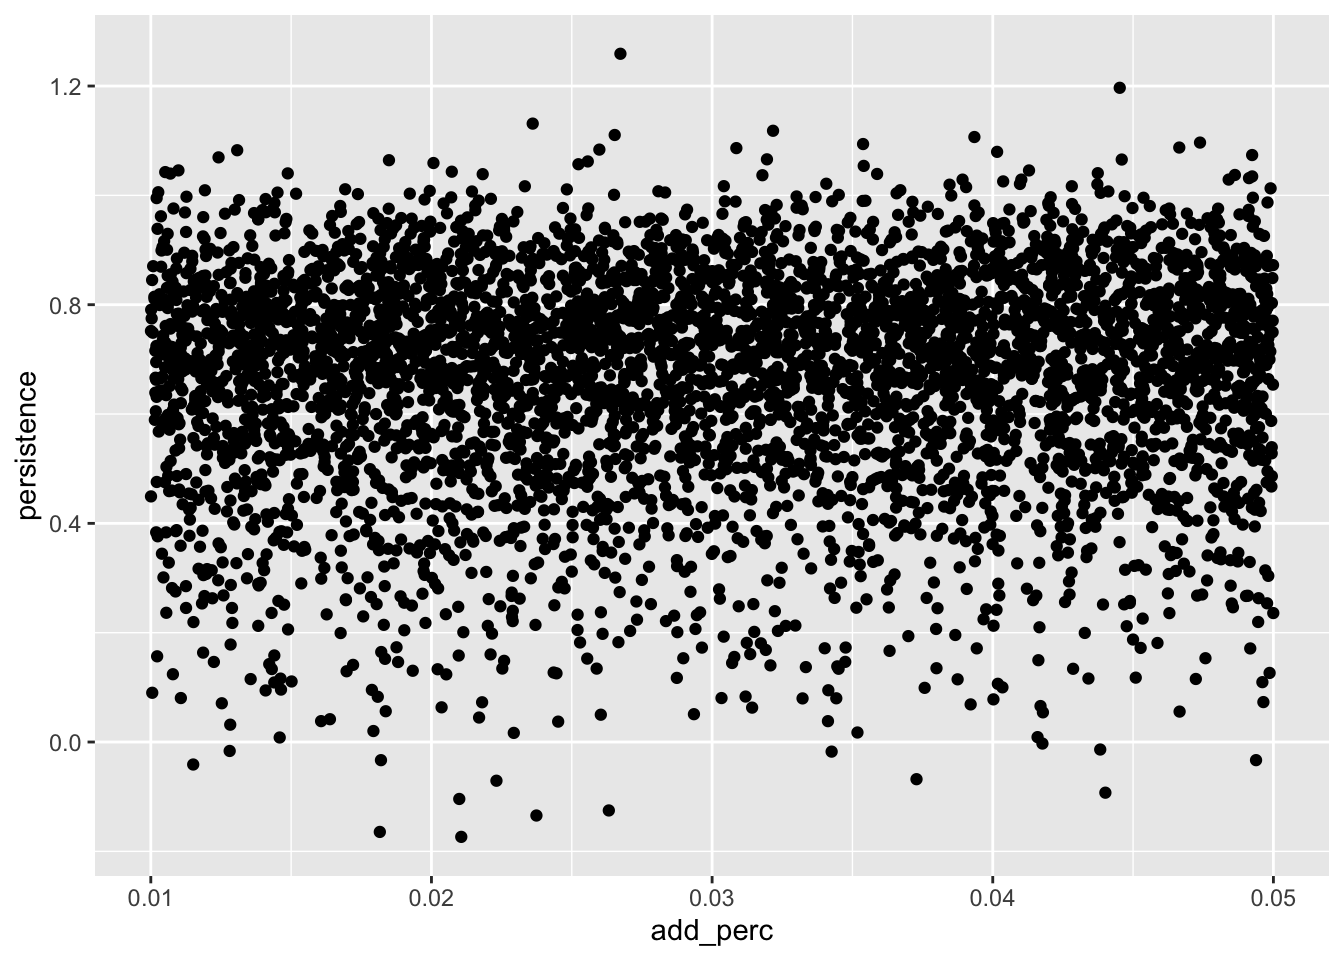 Scatter plot of persistence against add_perc ranging from 0.01 to 0.05. Persistent varies around an average of about 0.8. Plot is a cloud of points and there is no apparent relationship between these variables.